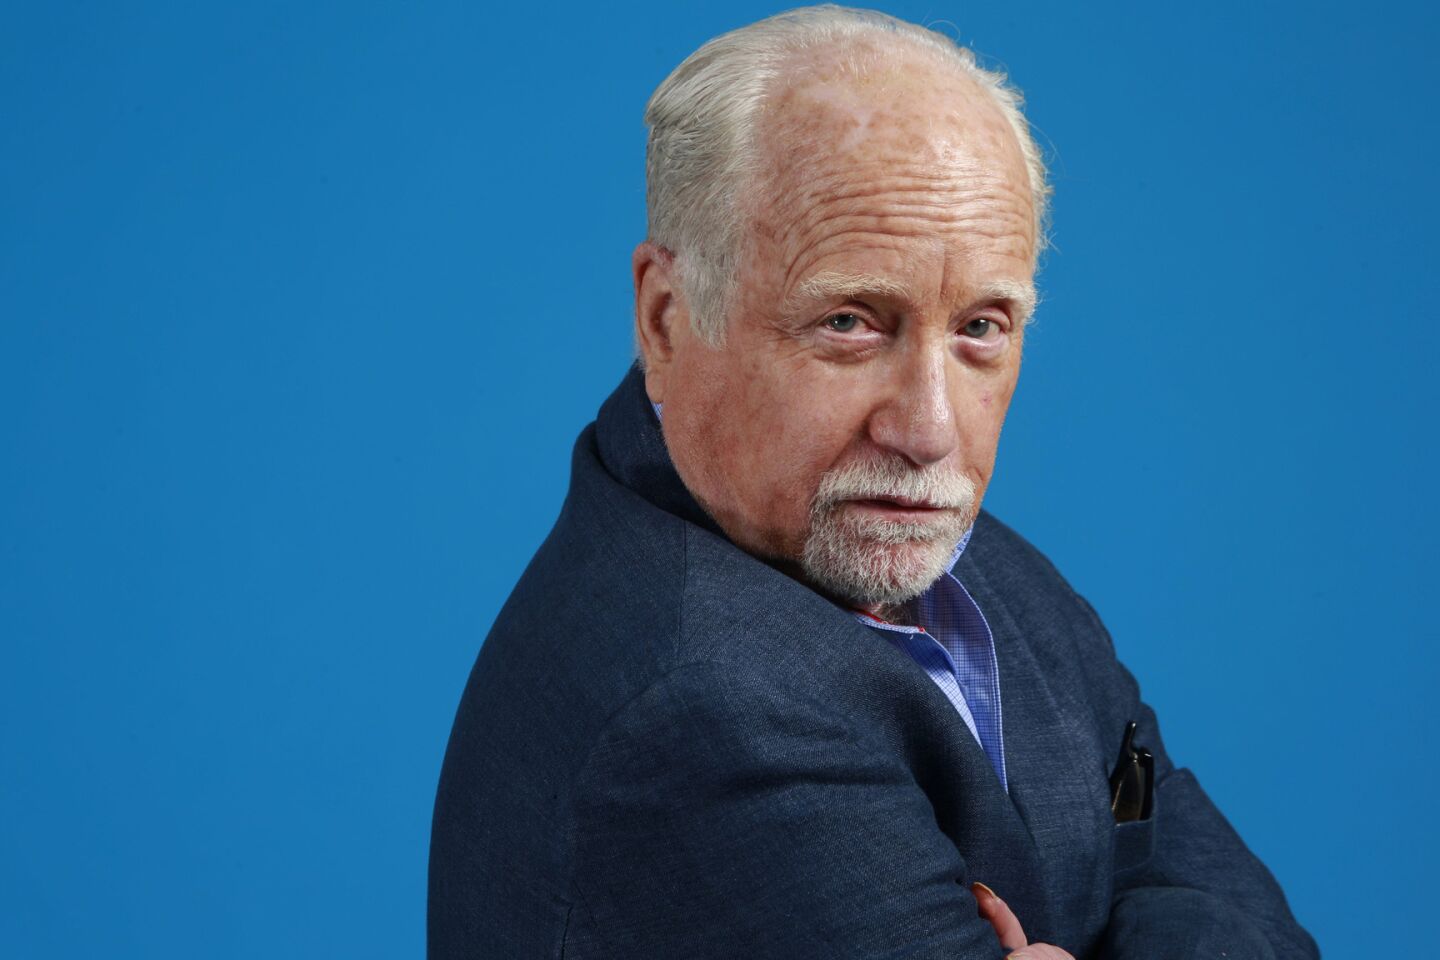 Celebrity portraits by The Times | Richard Dreyfuss